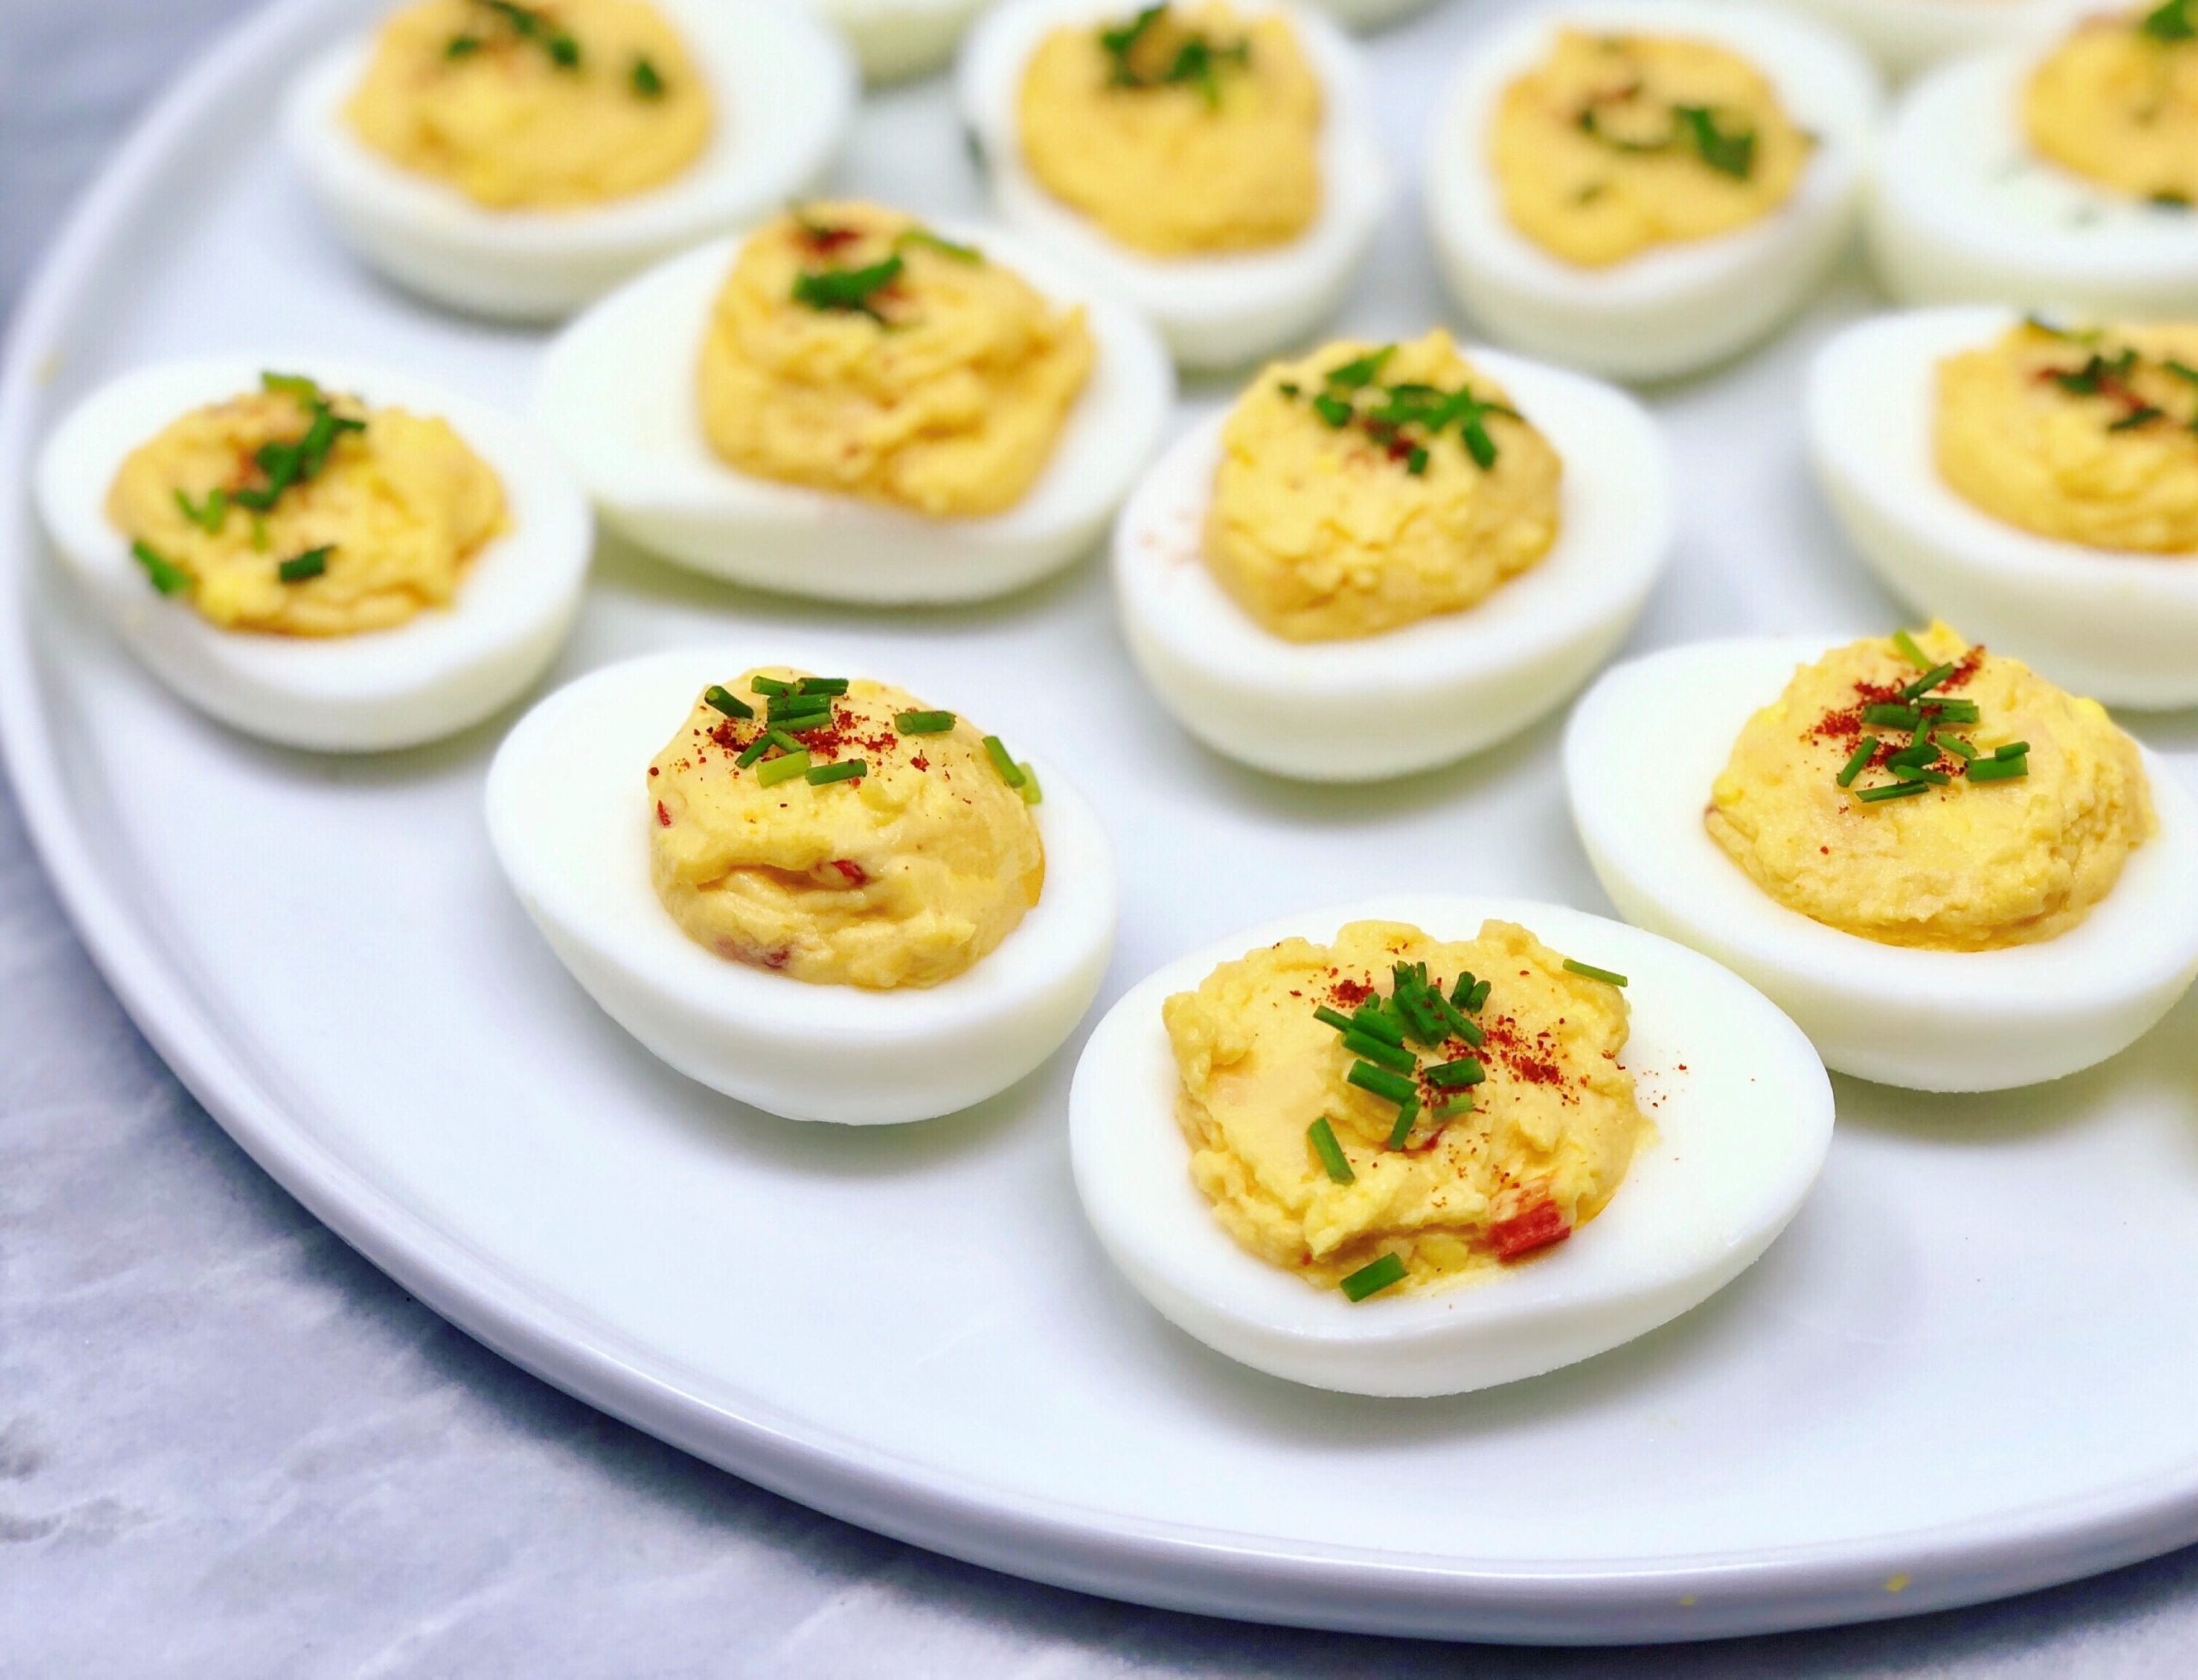 Dish of Pimento and Sharp Cheddar Deviled Eggs